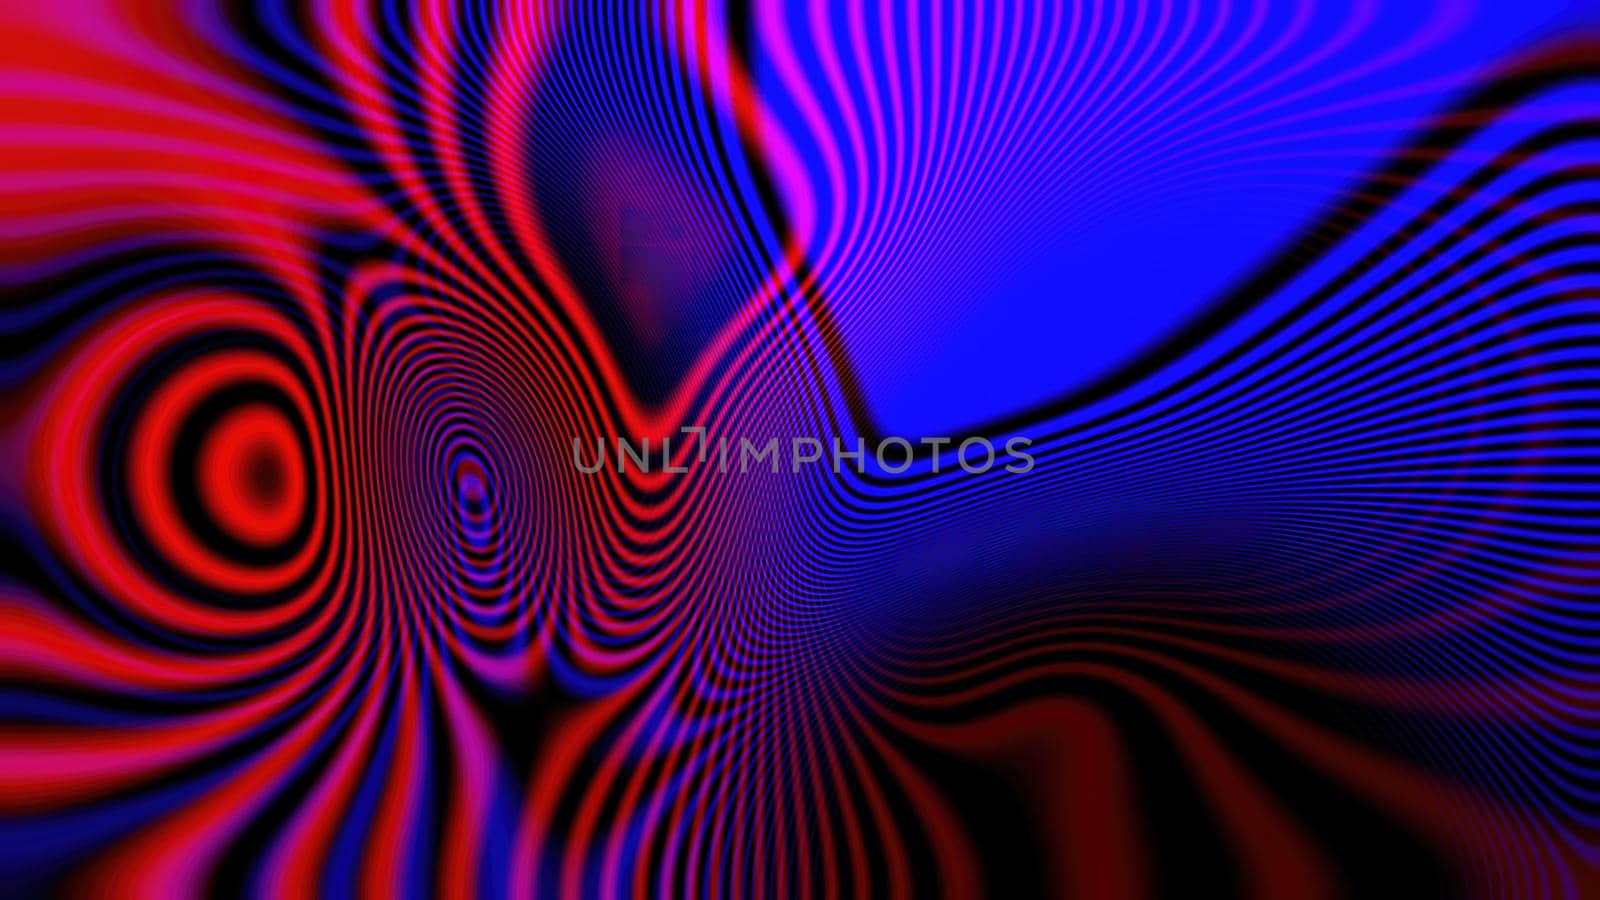 Zebra red and blue contour shadow background by cloudyew